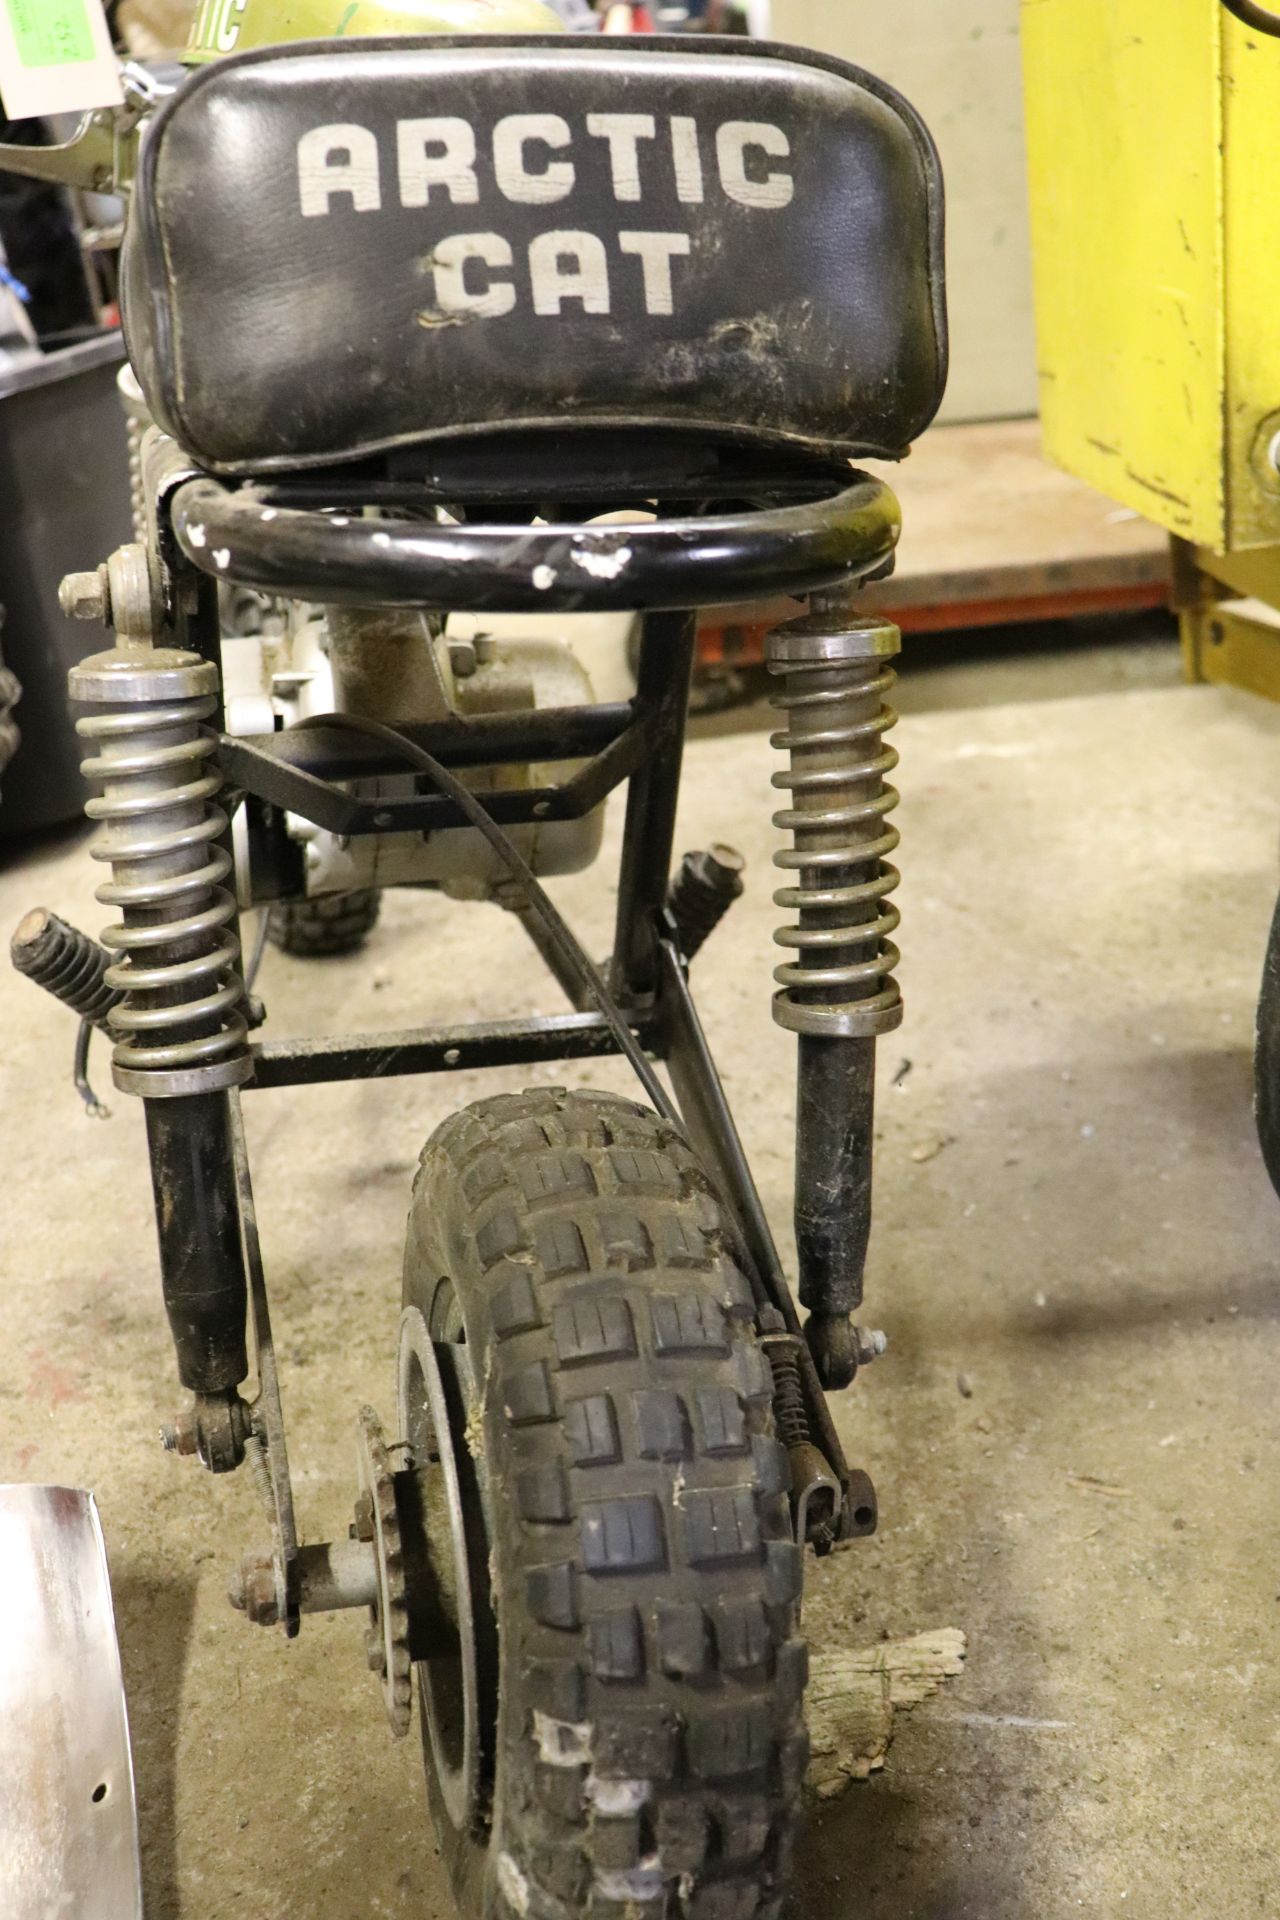 1971 Arctic Cat Whisker, model 2328-001 MINI BIKES MARKED AS PARTS BIKES, NOT OPERATIONAL, CONDITION - Image 5 of 5